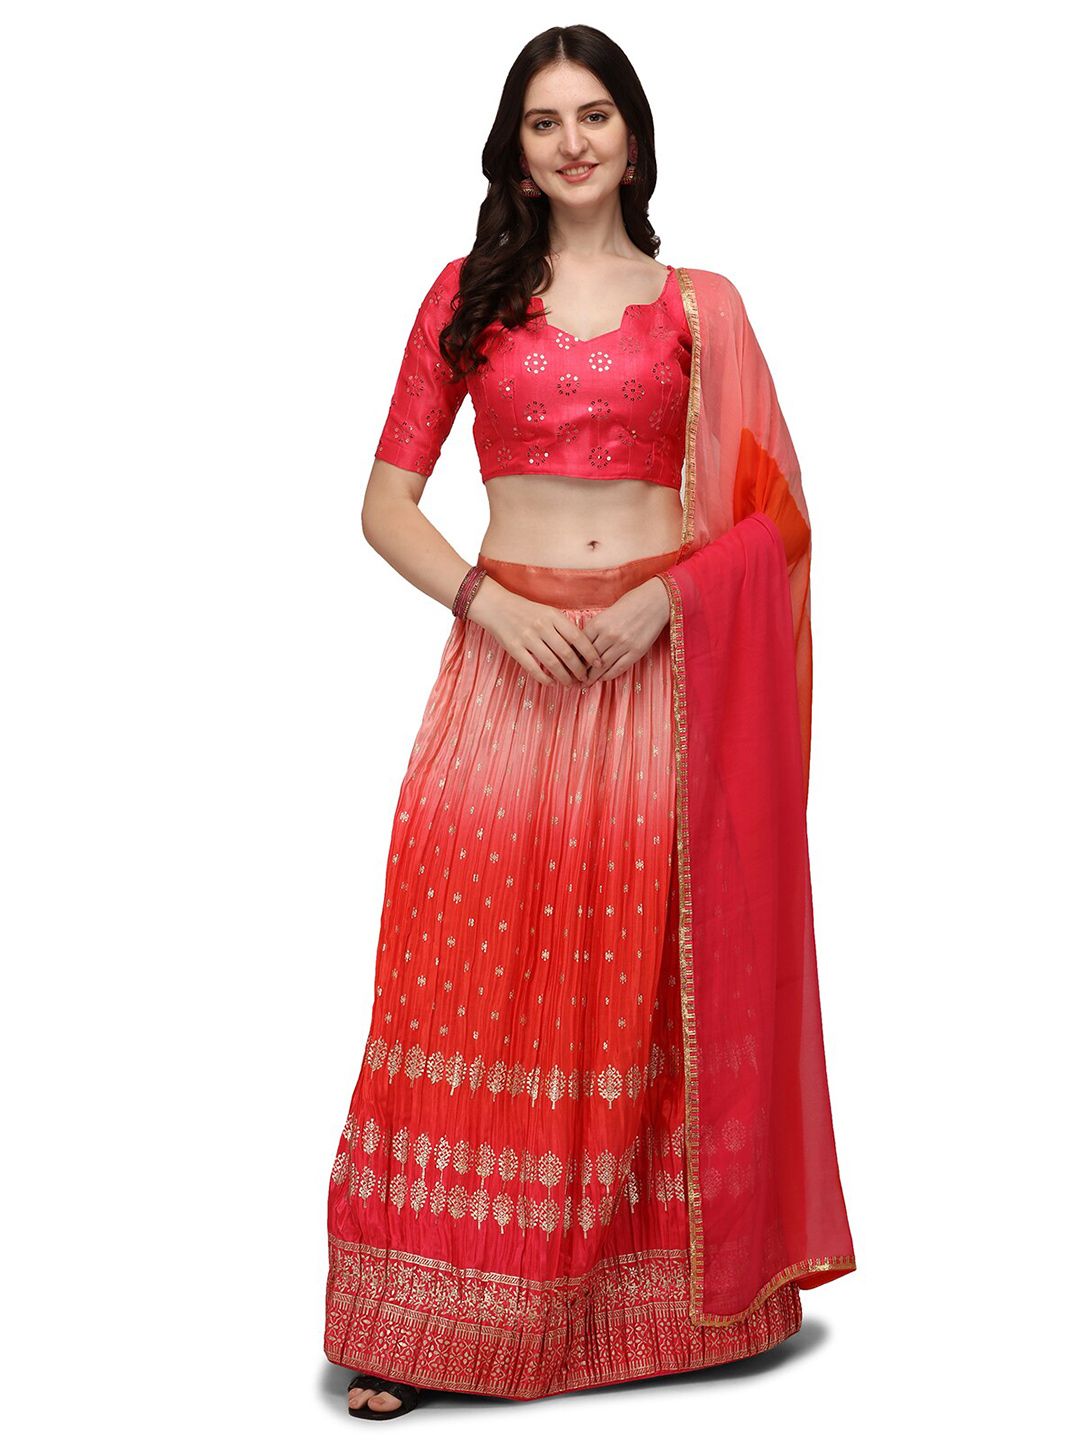 Pratham Blue Pink Embroidered Semi-Stitched Lehenga & Unstitched Blouse With Dupatta Price in India